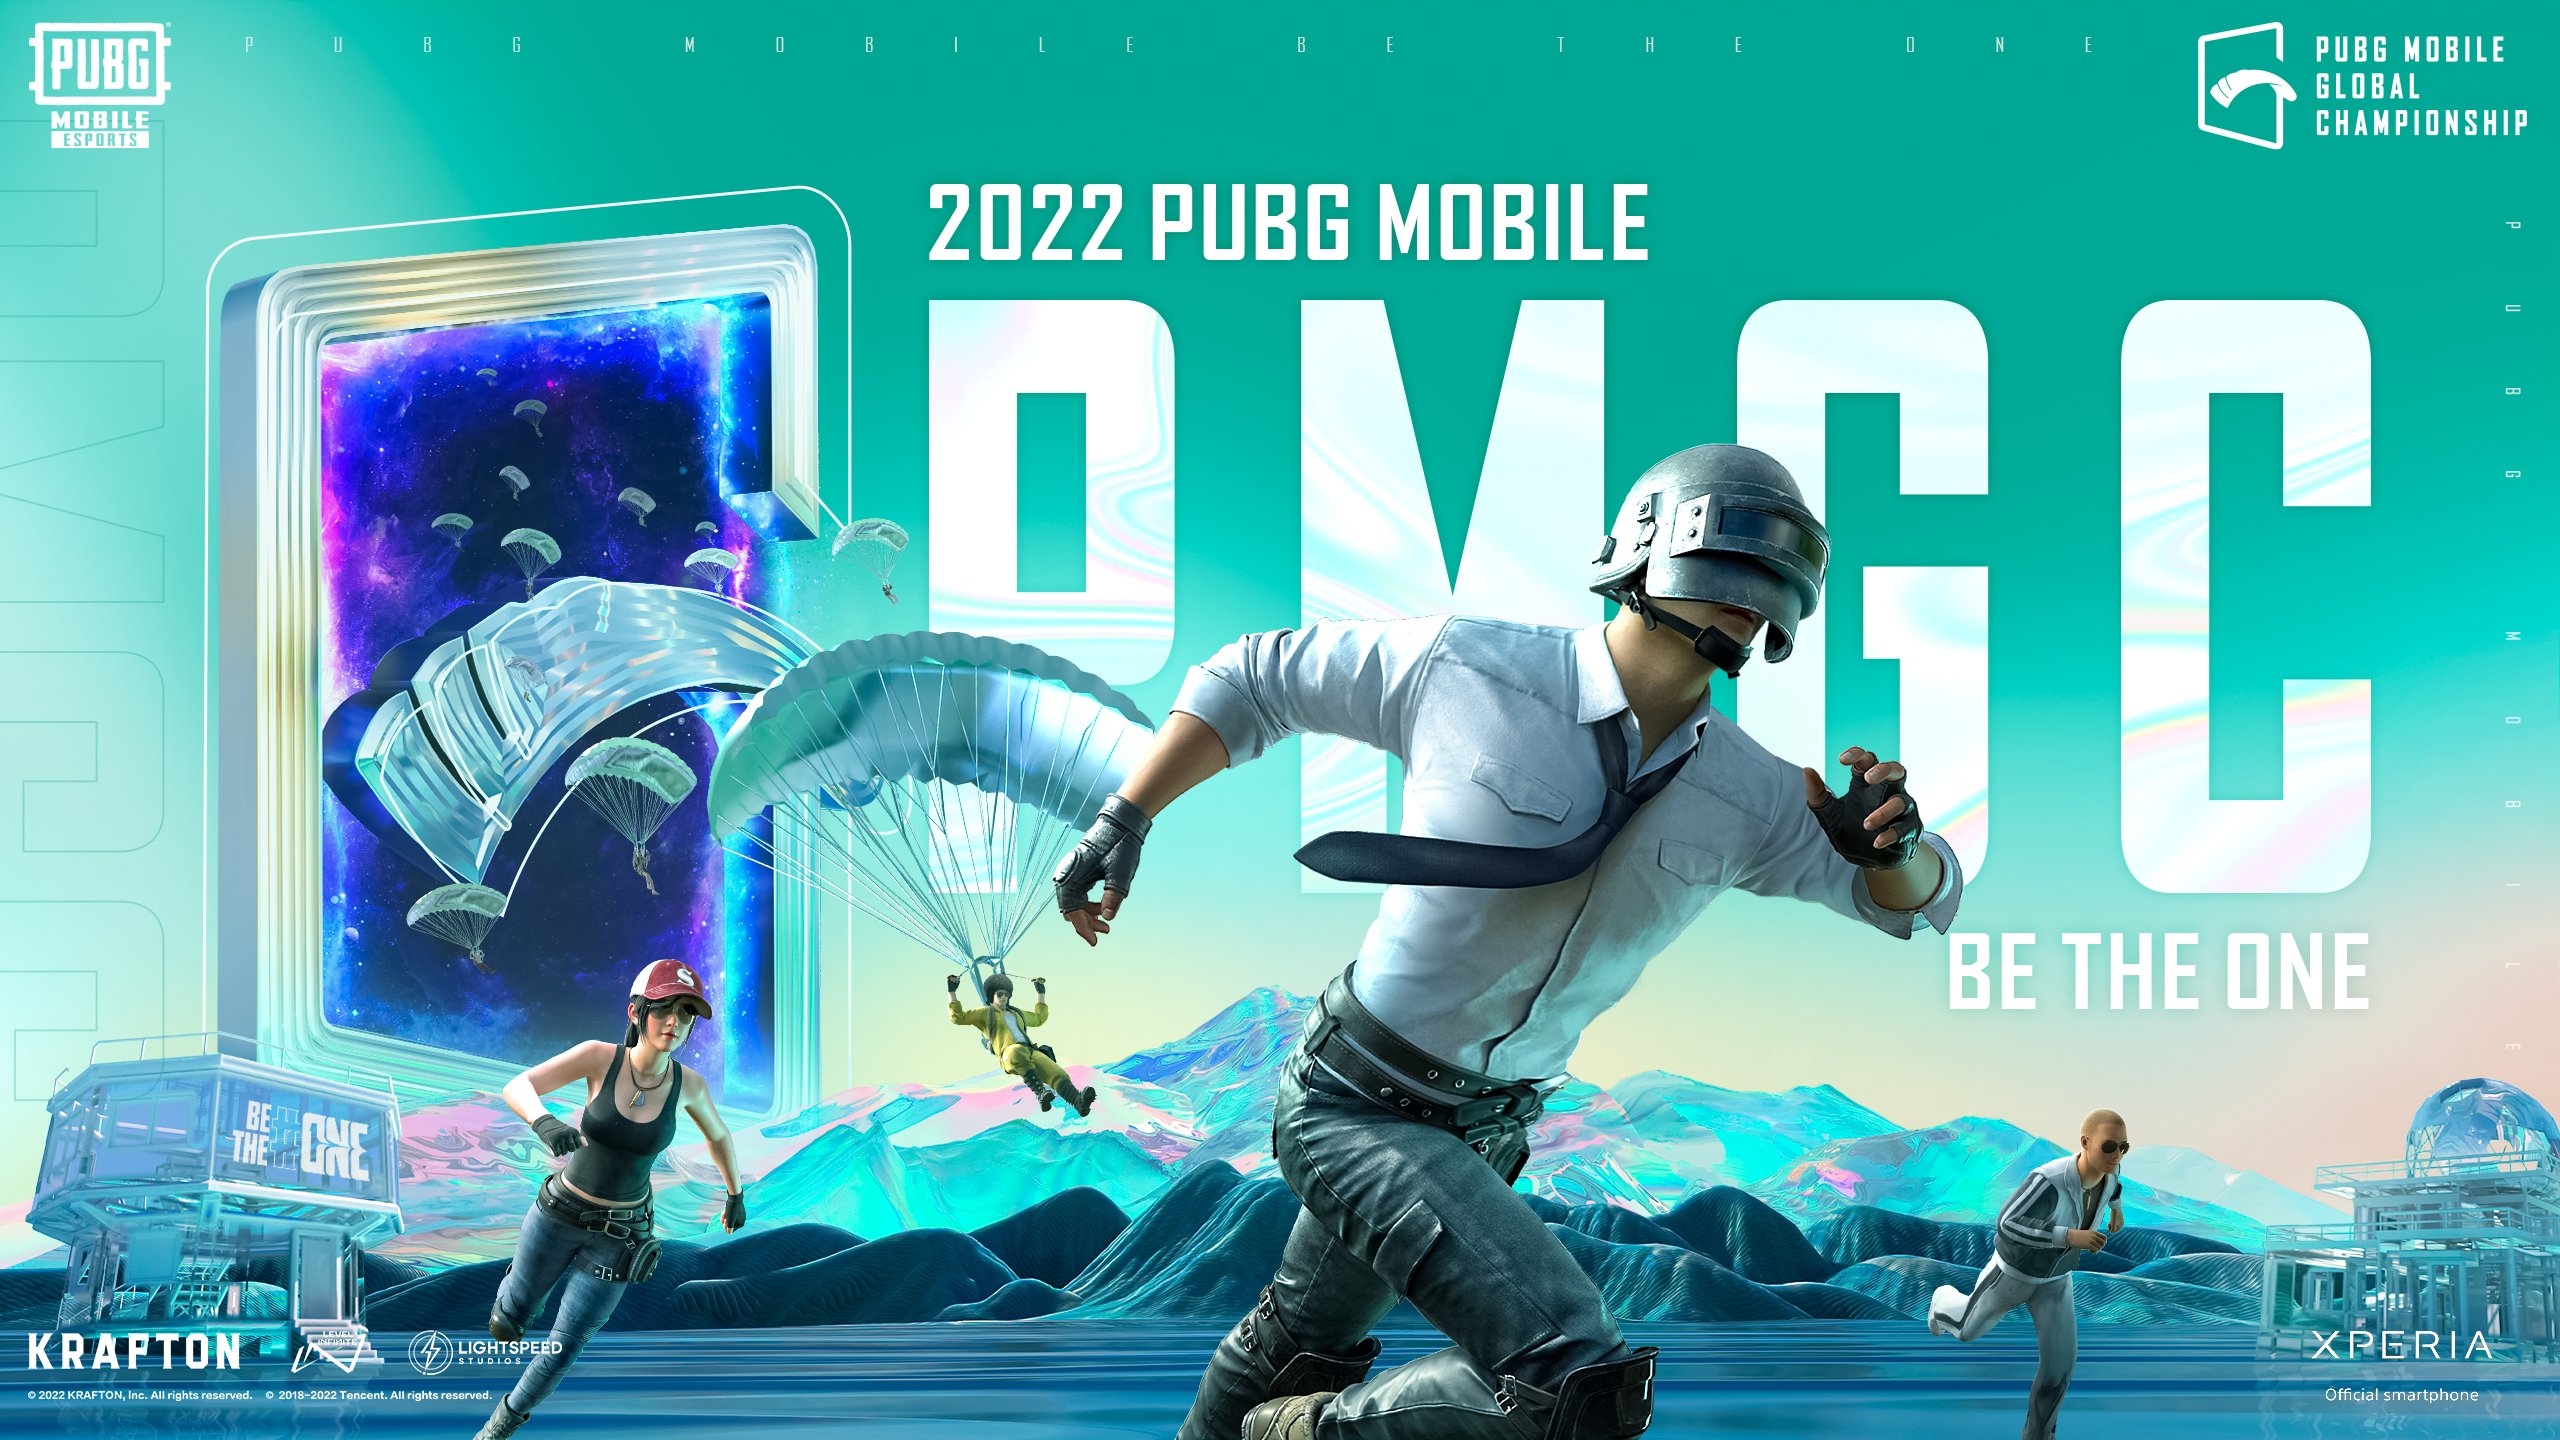 2022 PUBG MOBILE GLOBAL CHAMPIONSHIP feature image feature image